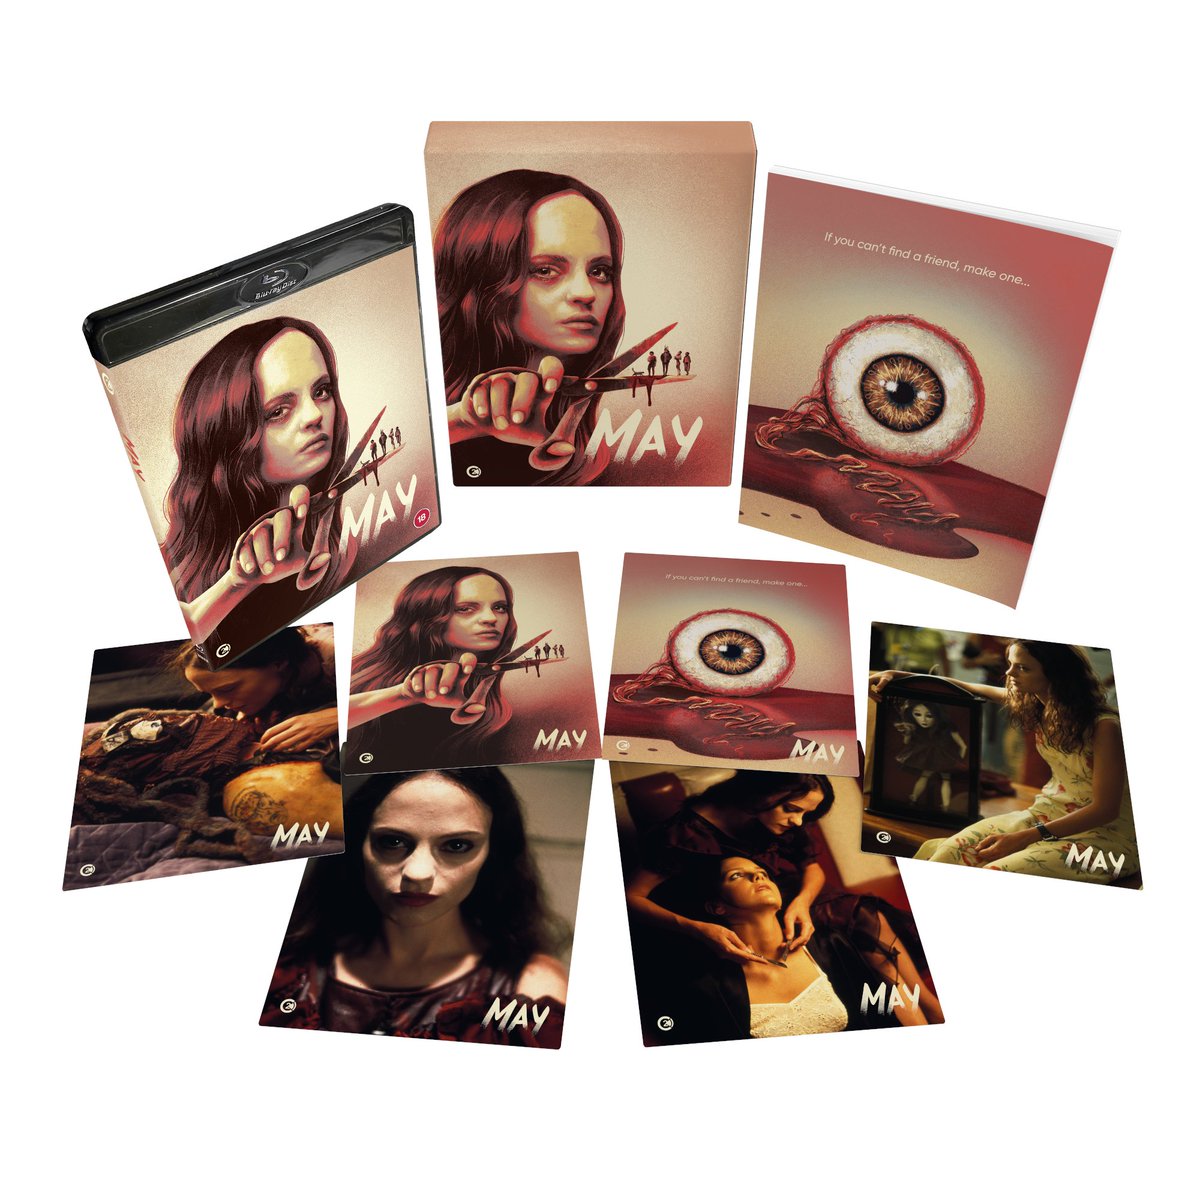 MAY: Limited Edition Blu-ray released July 24. 3 hours of new features including interviews with Lucky McKee, Rian Johnson, James Duval & many more, On the Set feature, new commentary & video essay, 70 page book & art cards. Standard Edition also available bit.ly/MayLtdEd